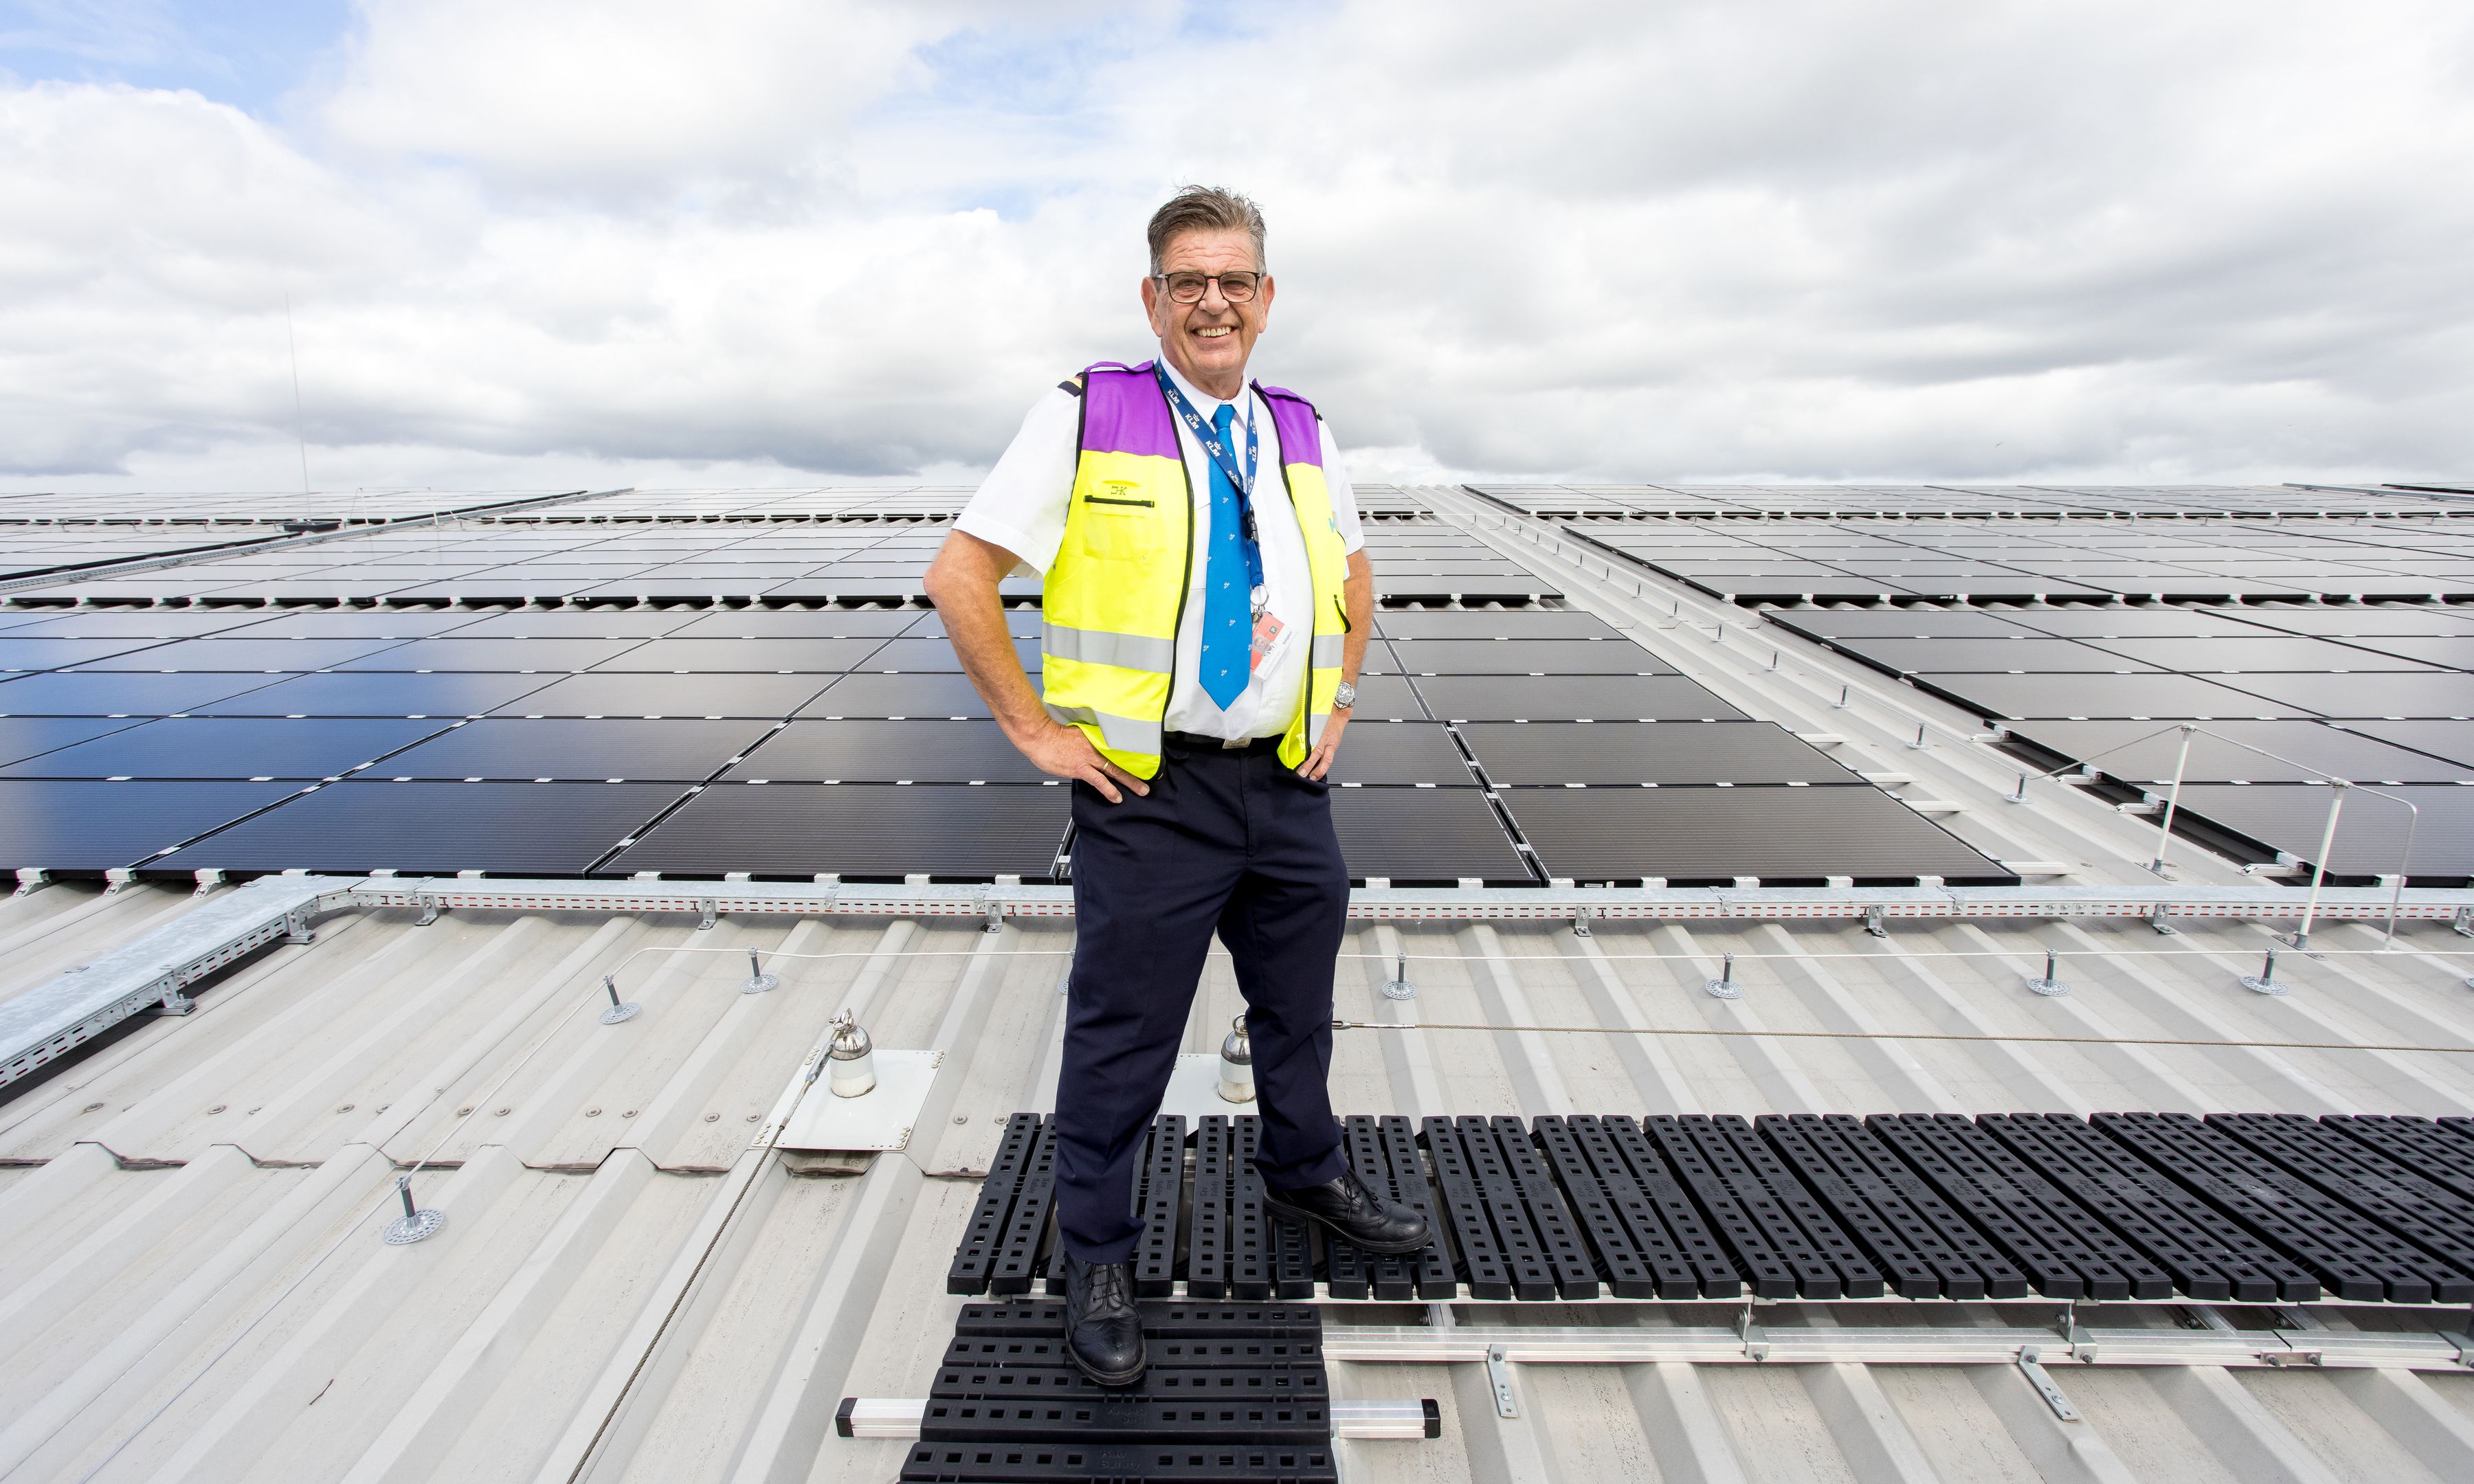 Employee on hanagr roof with solar panels